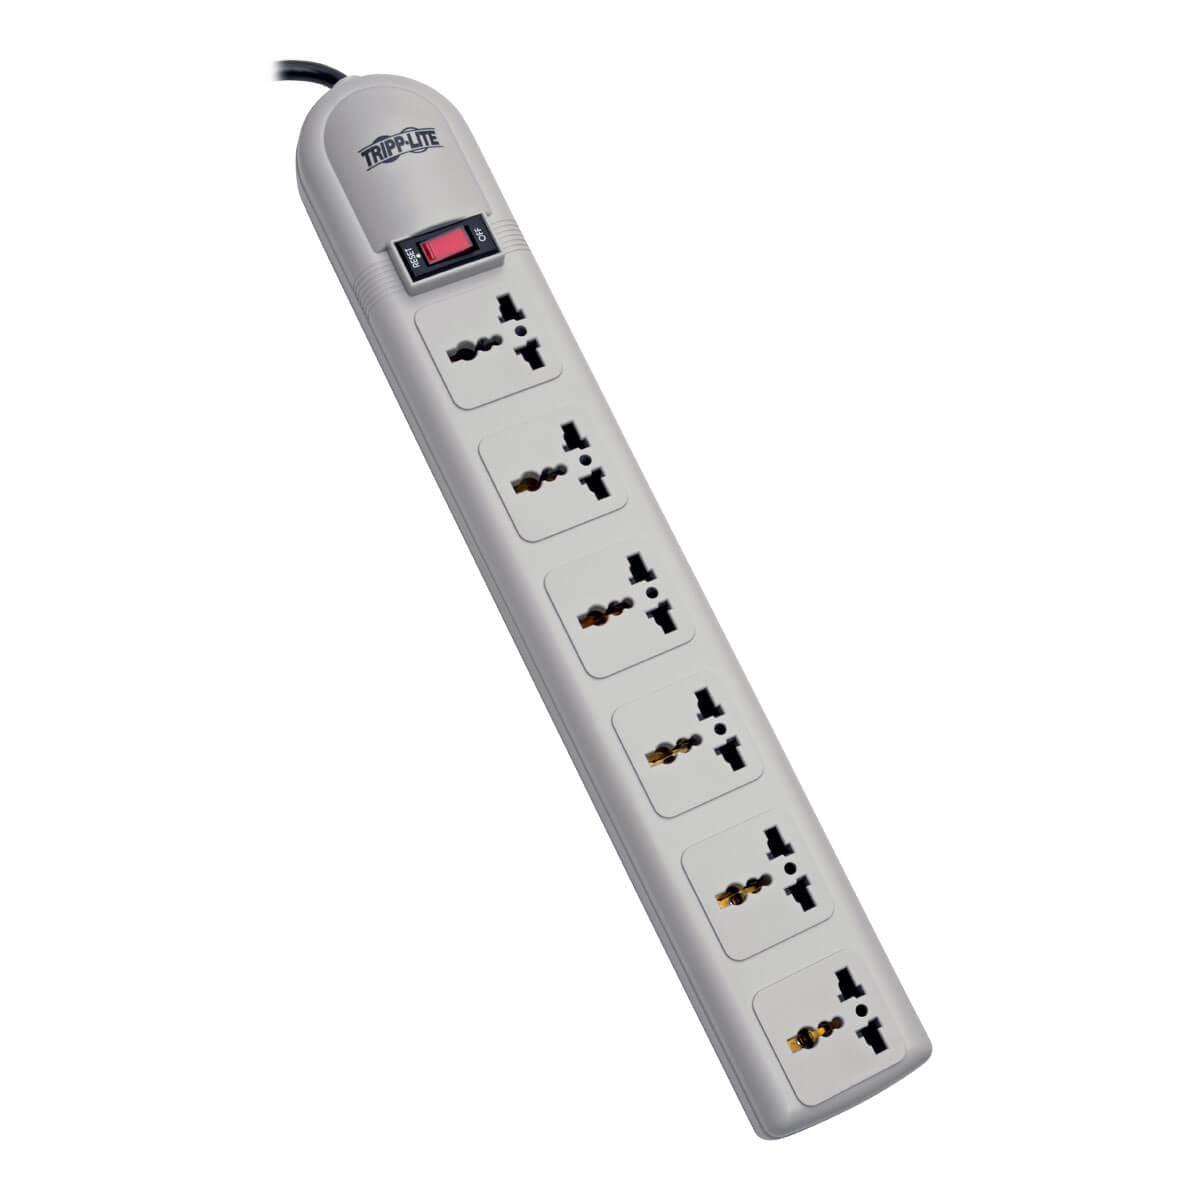 Tripp Lite Super6Omnib Protect It! 230V 6-Universal Outlet Surge Protector, 1.8M Cord, British Plug, 750 Joules